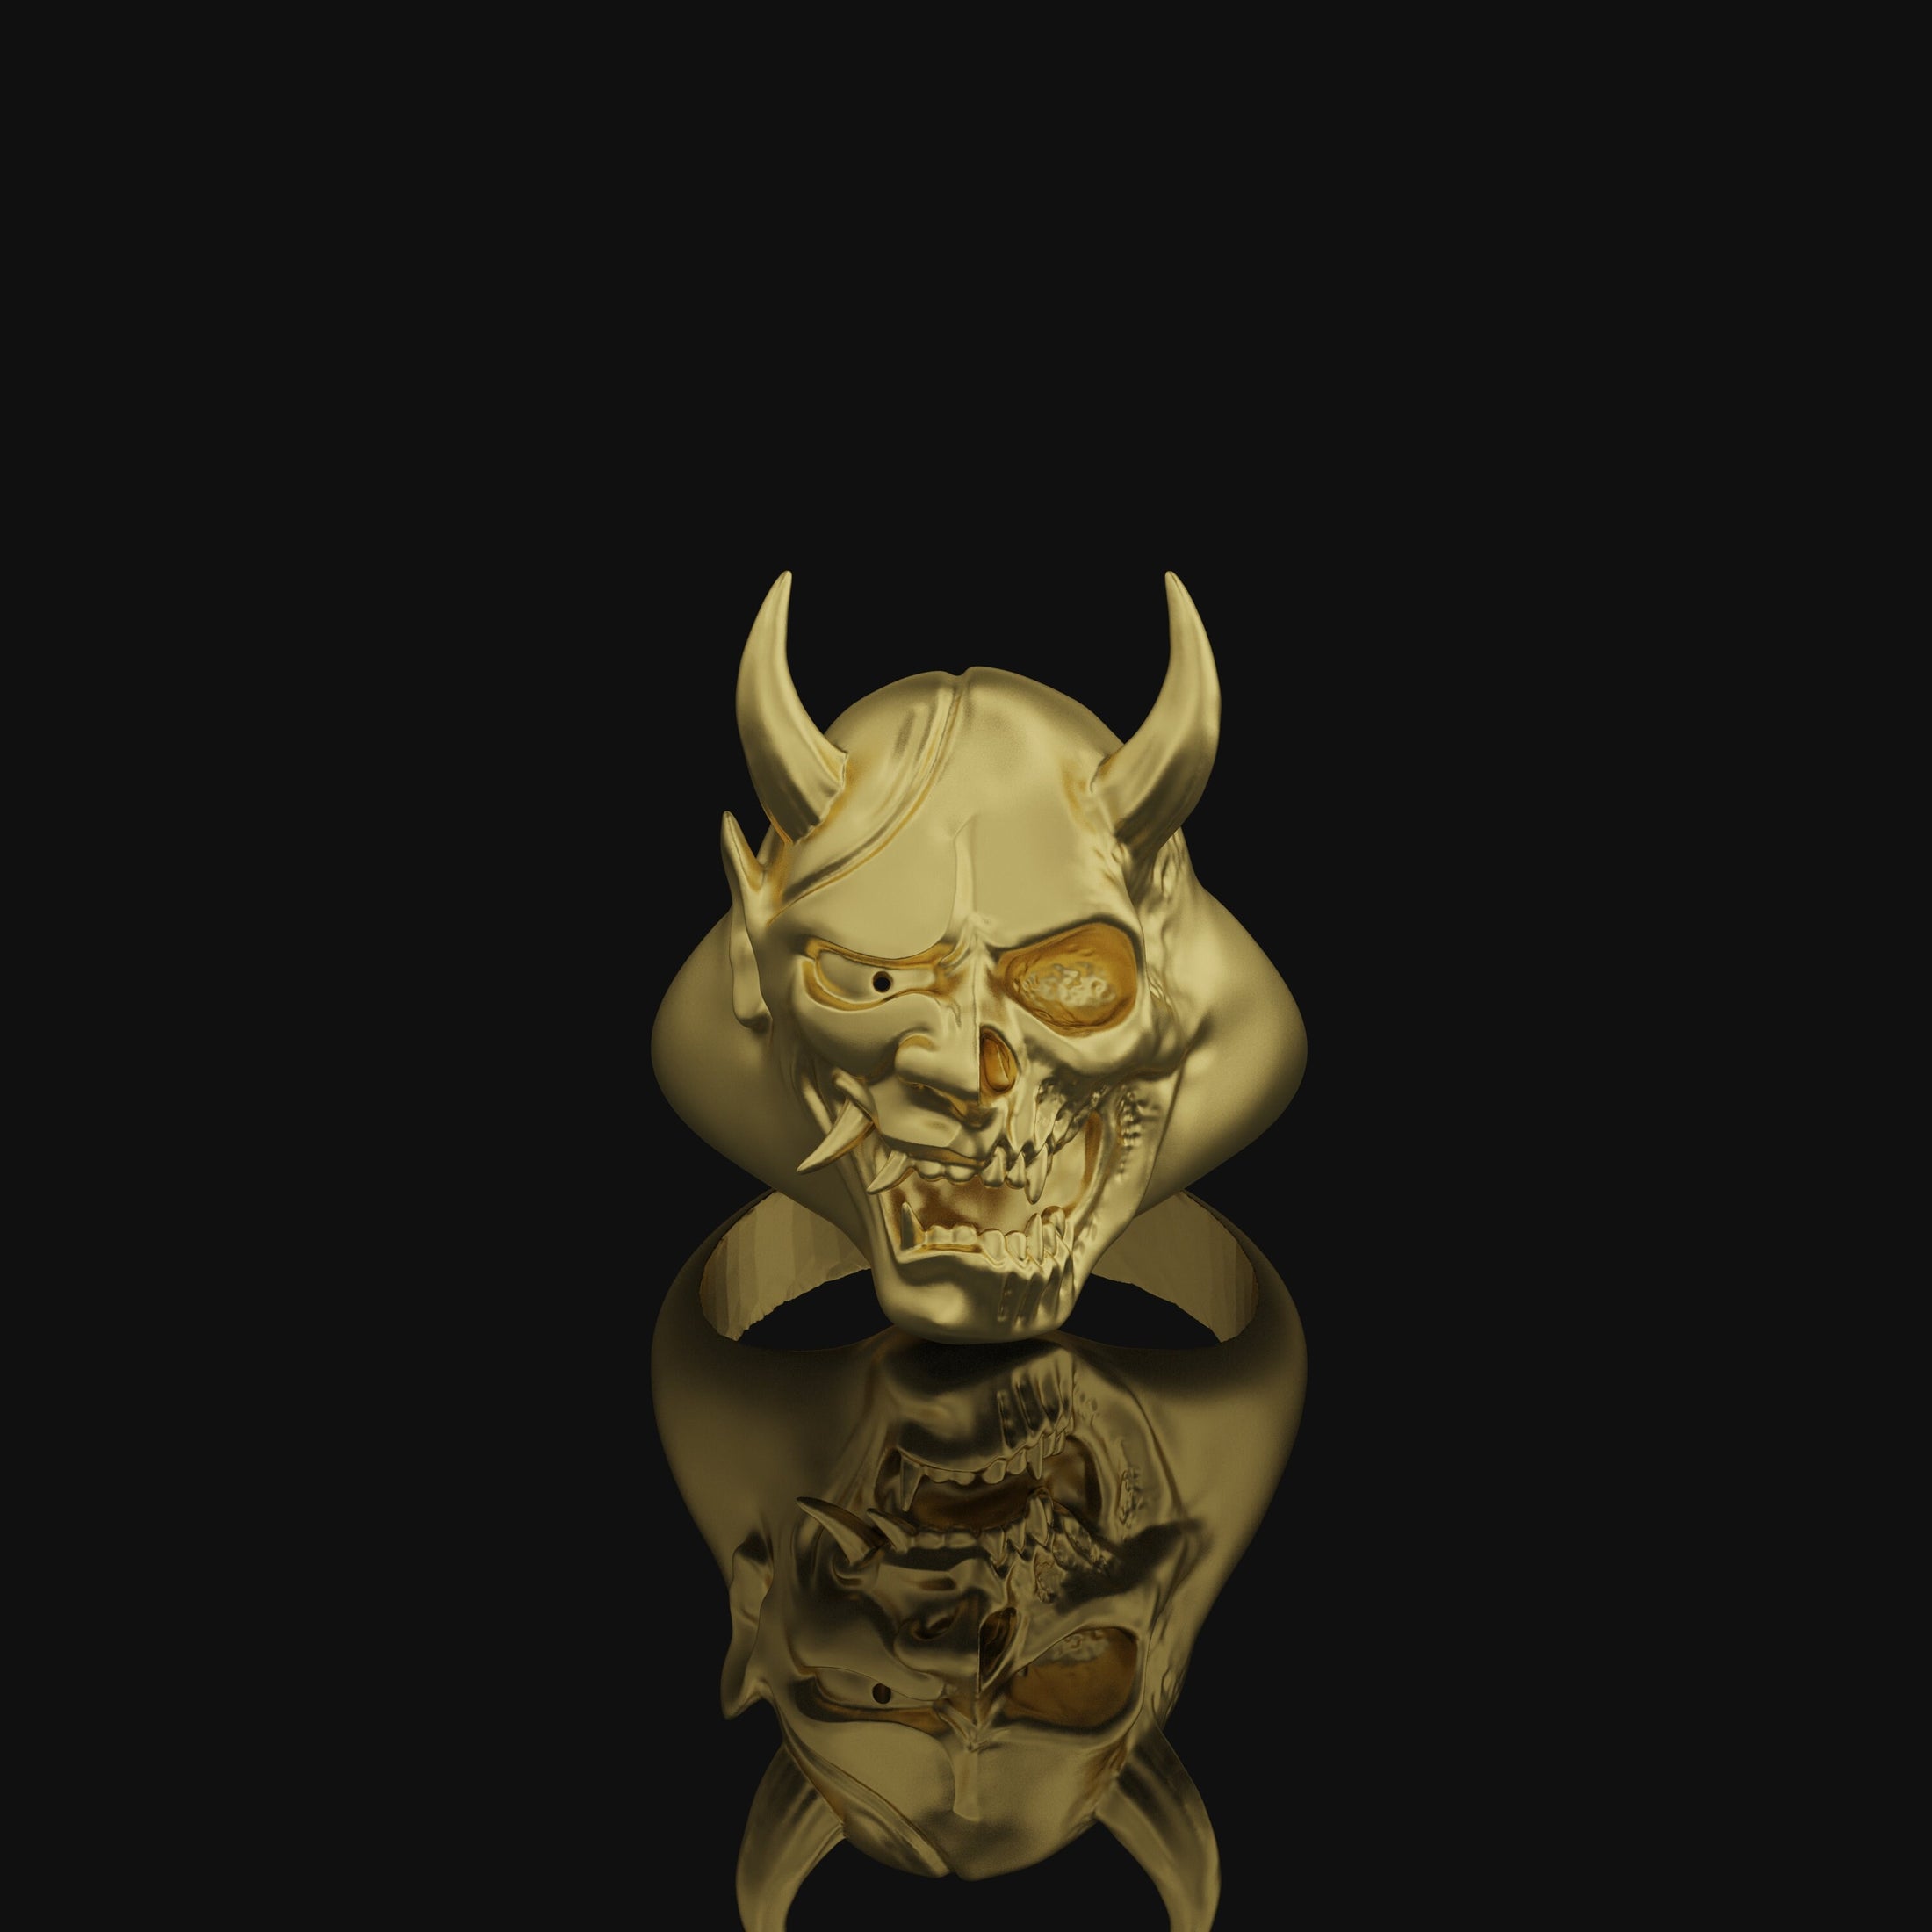 Silver Dead Oni Ring, Half-Breed Oni-Hannya Design, Japanese Skull Ring, Unique Yokai Inspired Jewelry, Cultural Mythology Piece Gold Finish